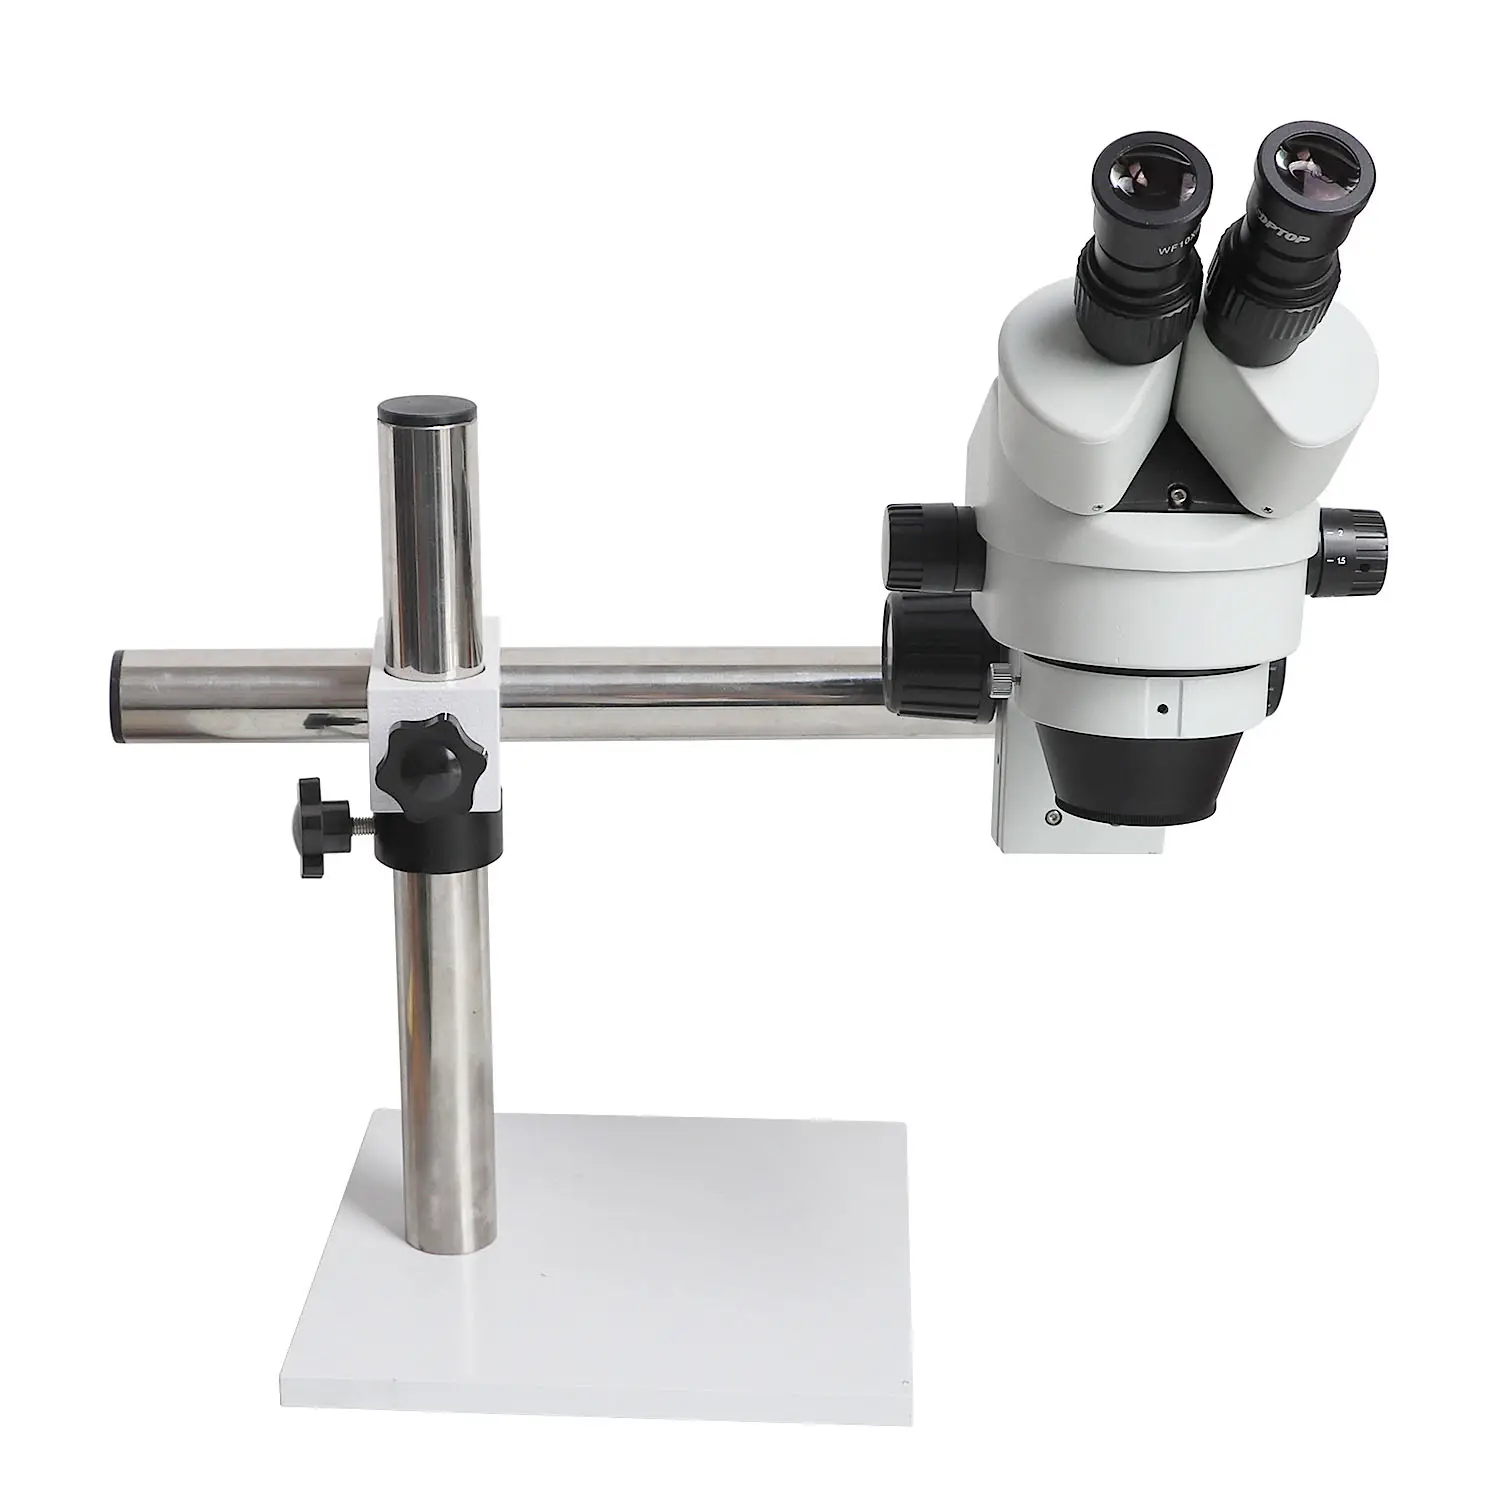 Jewelry Inlaid Micropanelling Machine Stereoscopic Micro-Setting Microscope Stone Setting jeweller's Essential Tool Equipment